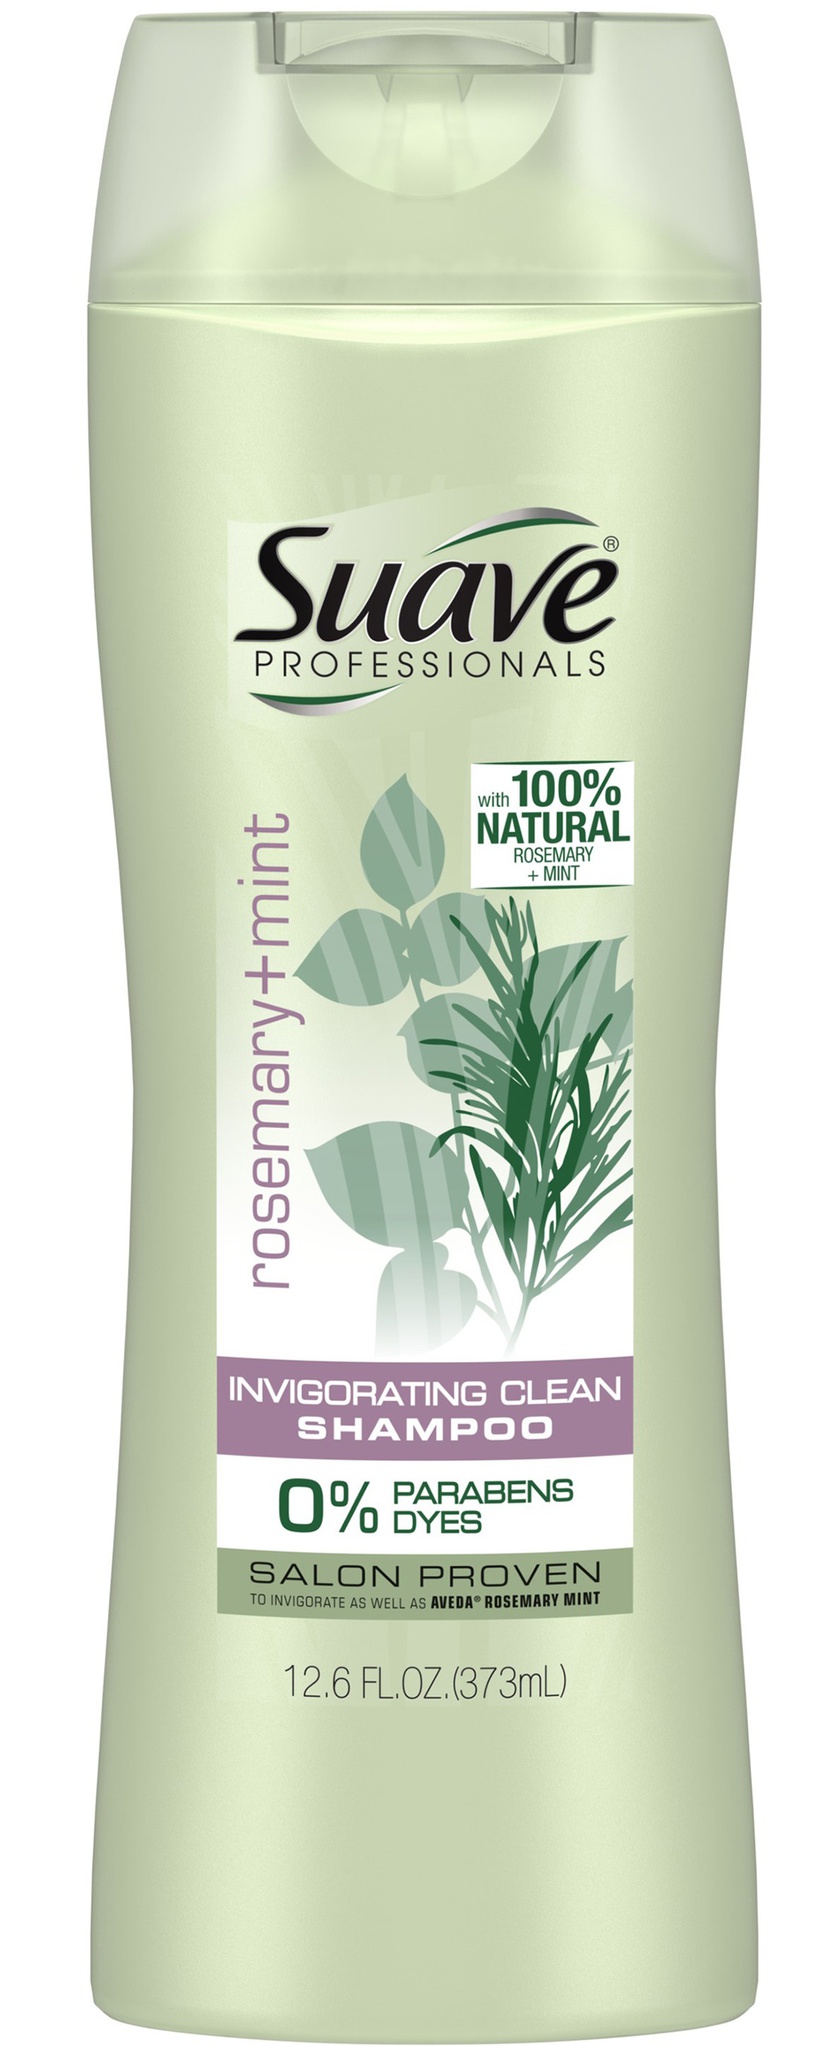 Suave Professionals Rosemary & Mint